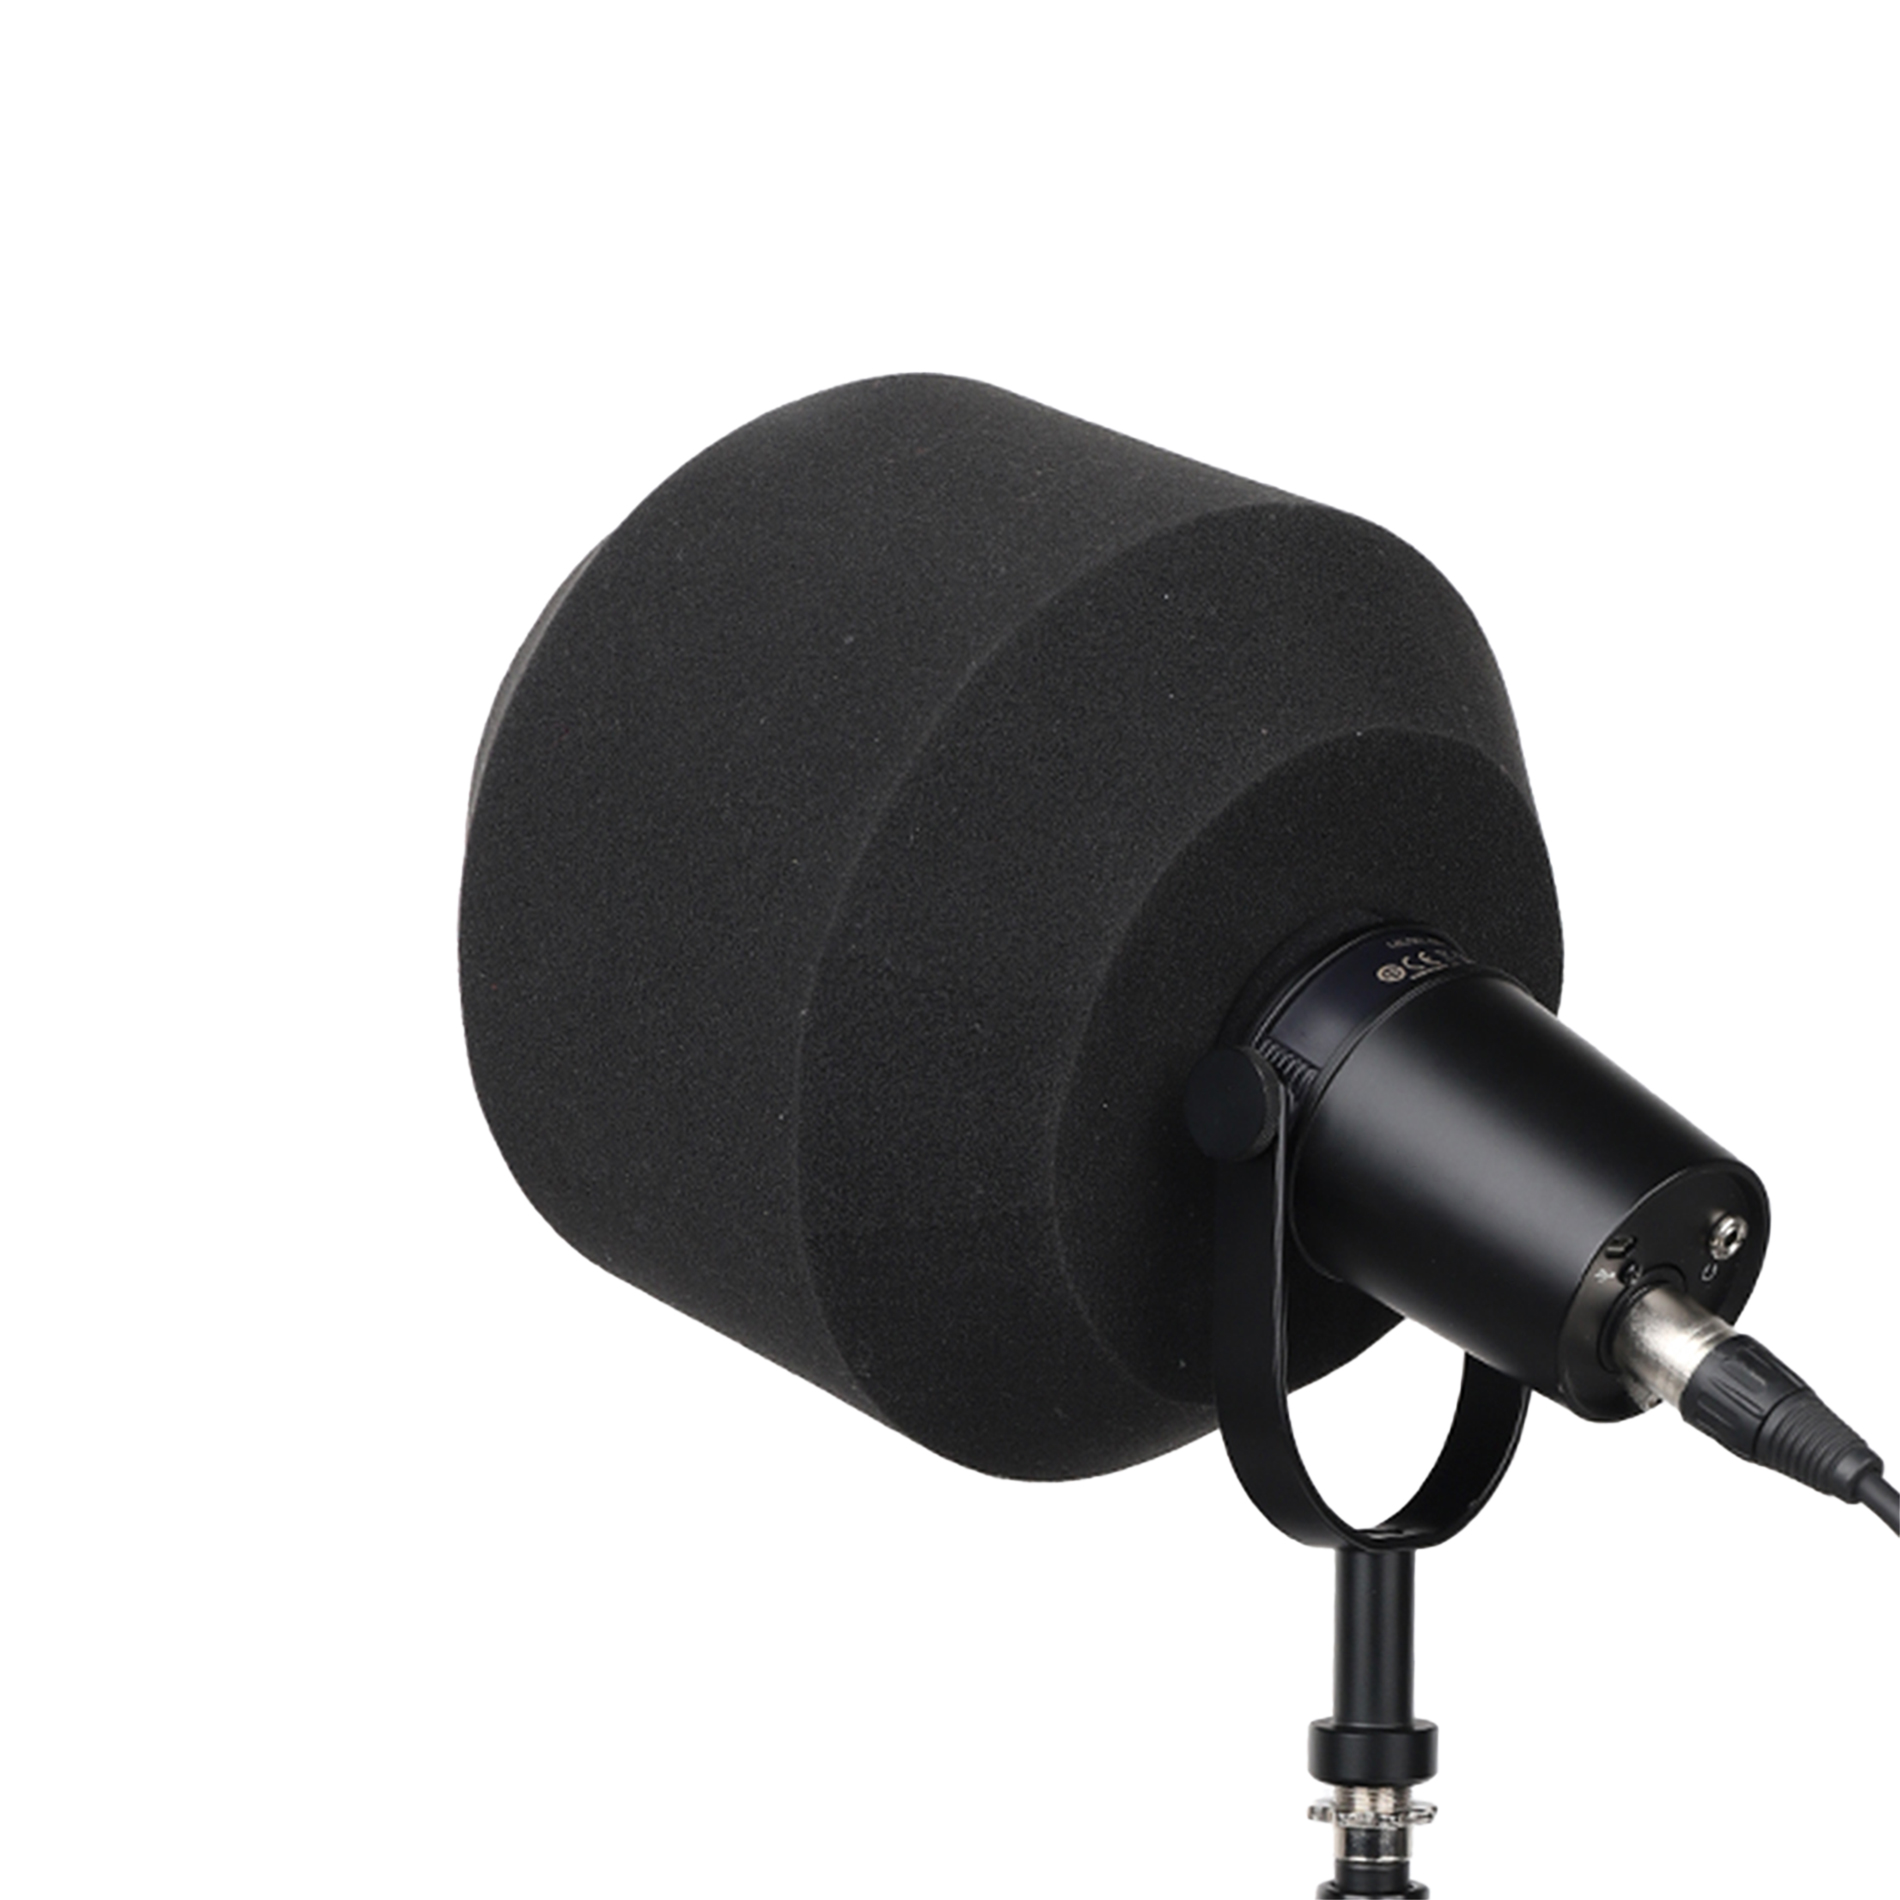 Alctron Pf 7 - Pop filter & microphone screen - Variation 6